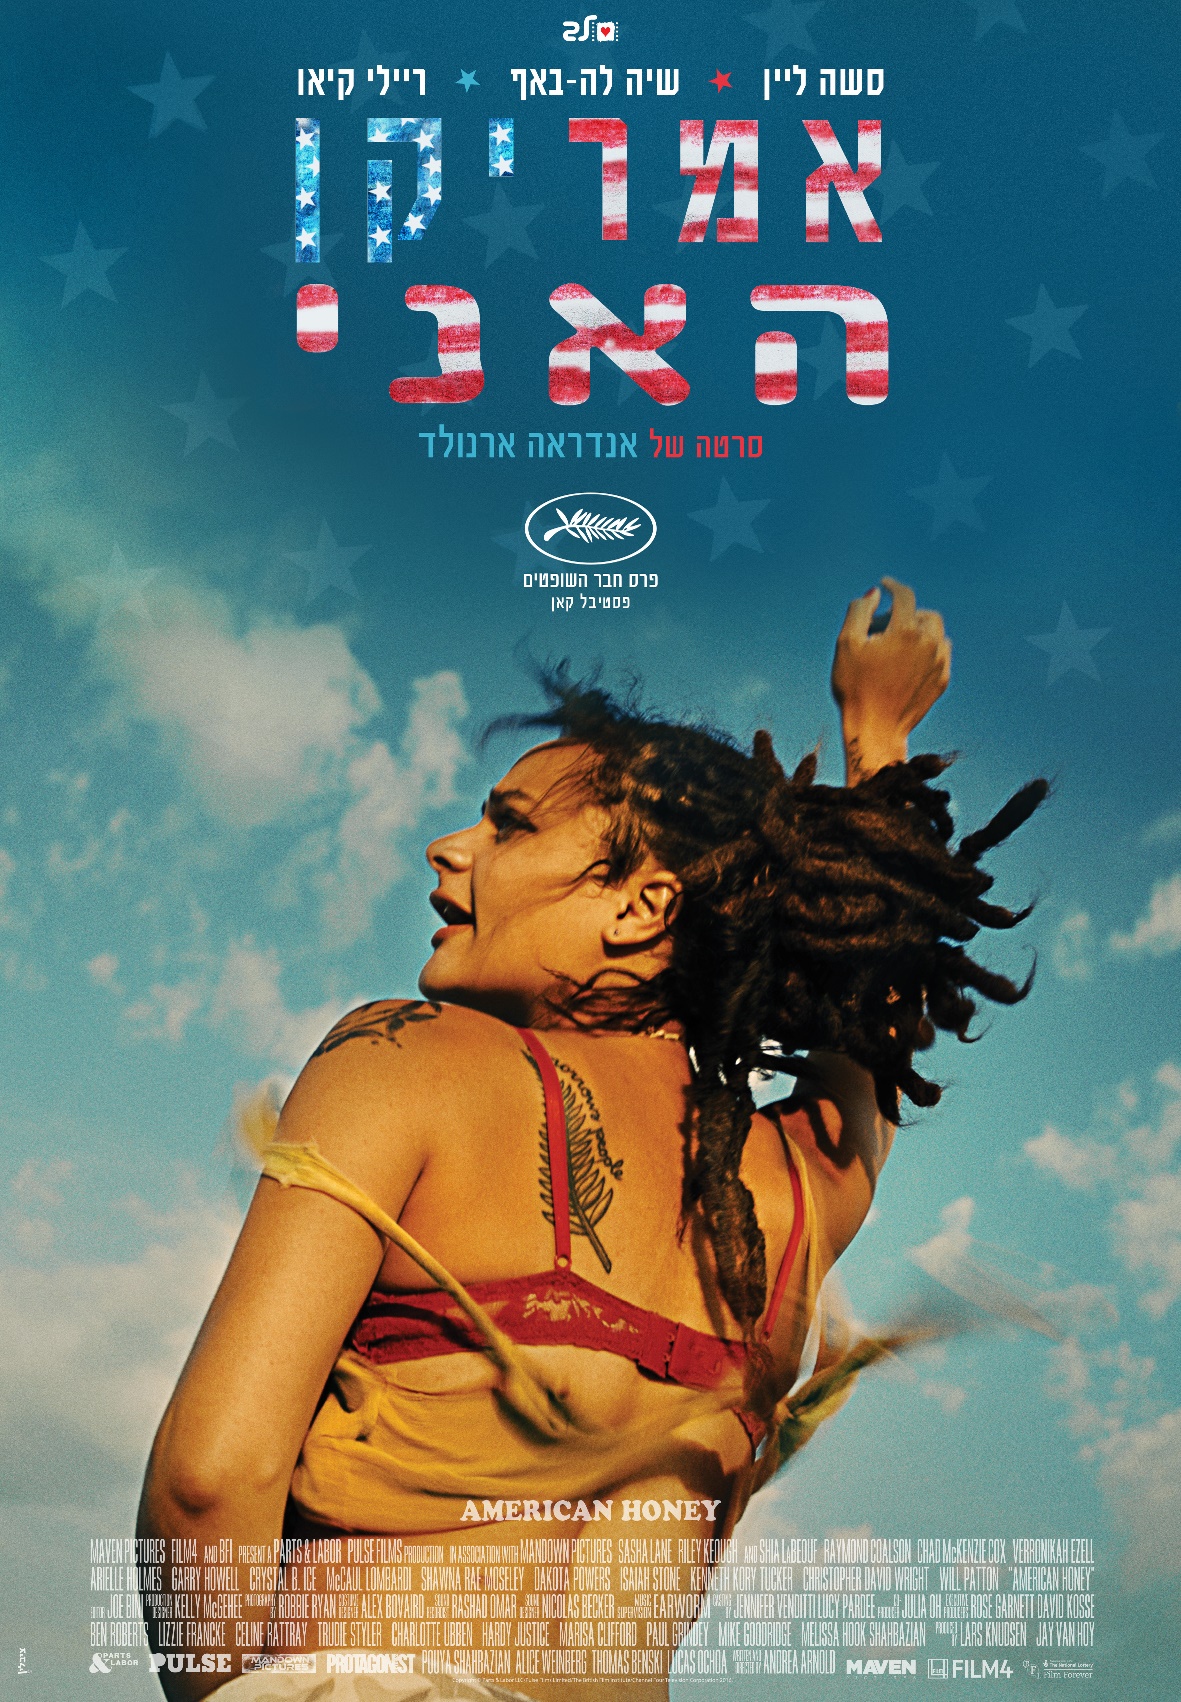 9213-AMERICAN HONEY POSTER_4.indd